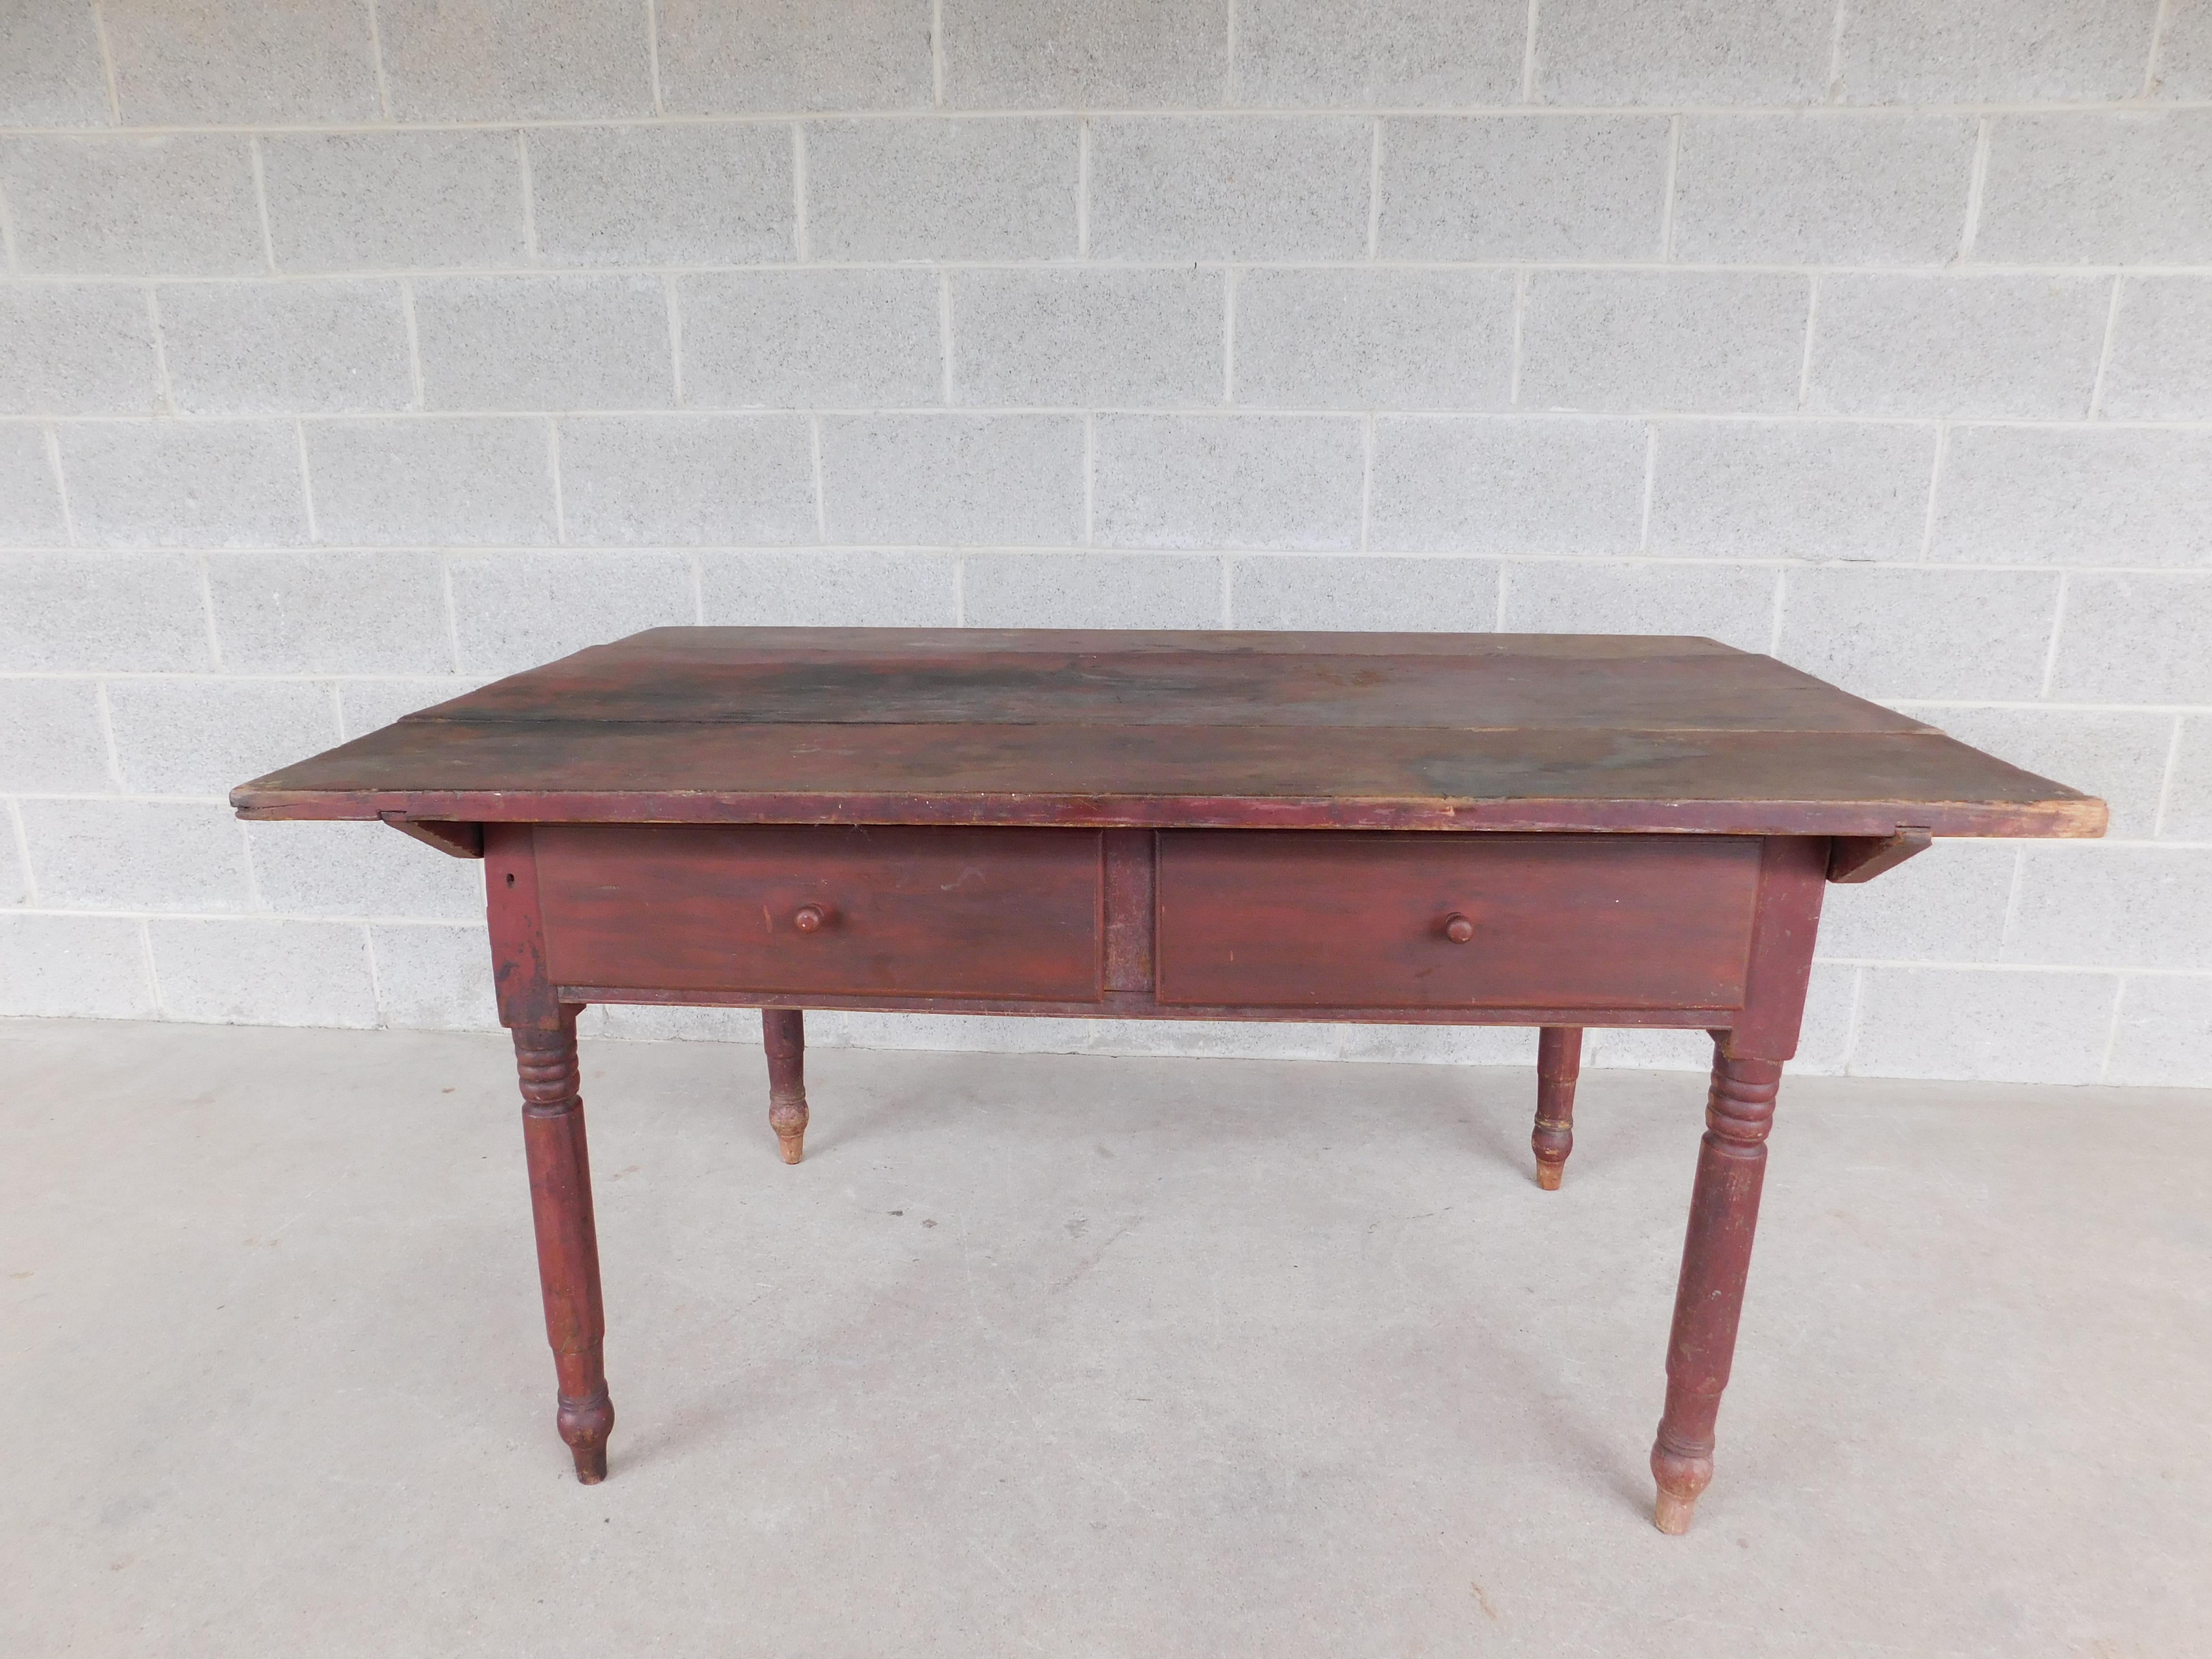 Antique 19th Century Tavern Work Dining Table In Fair Condition For Sale In Parkesburg, PA